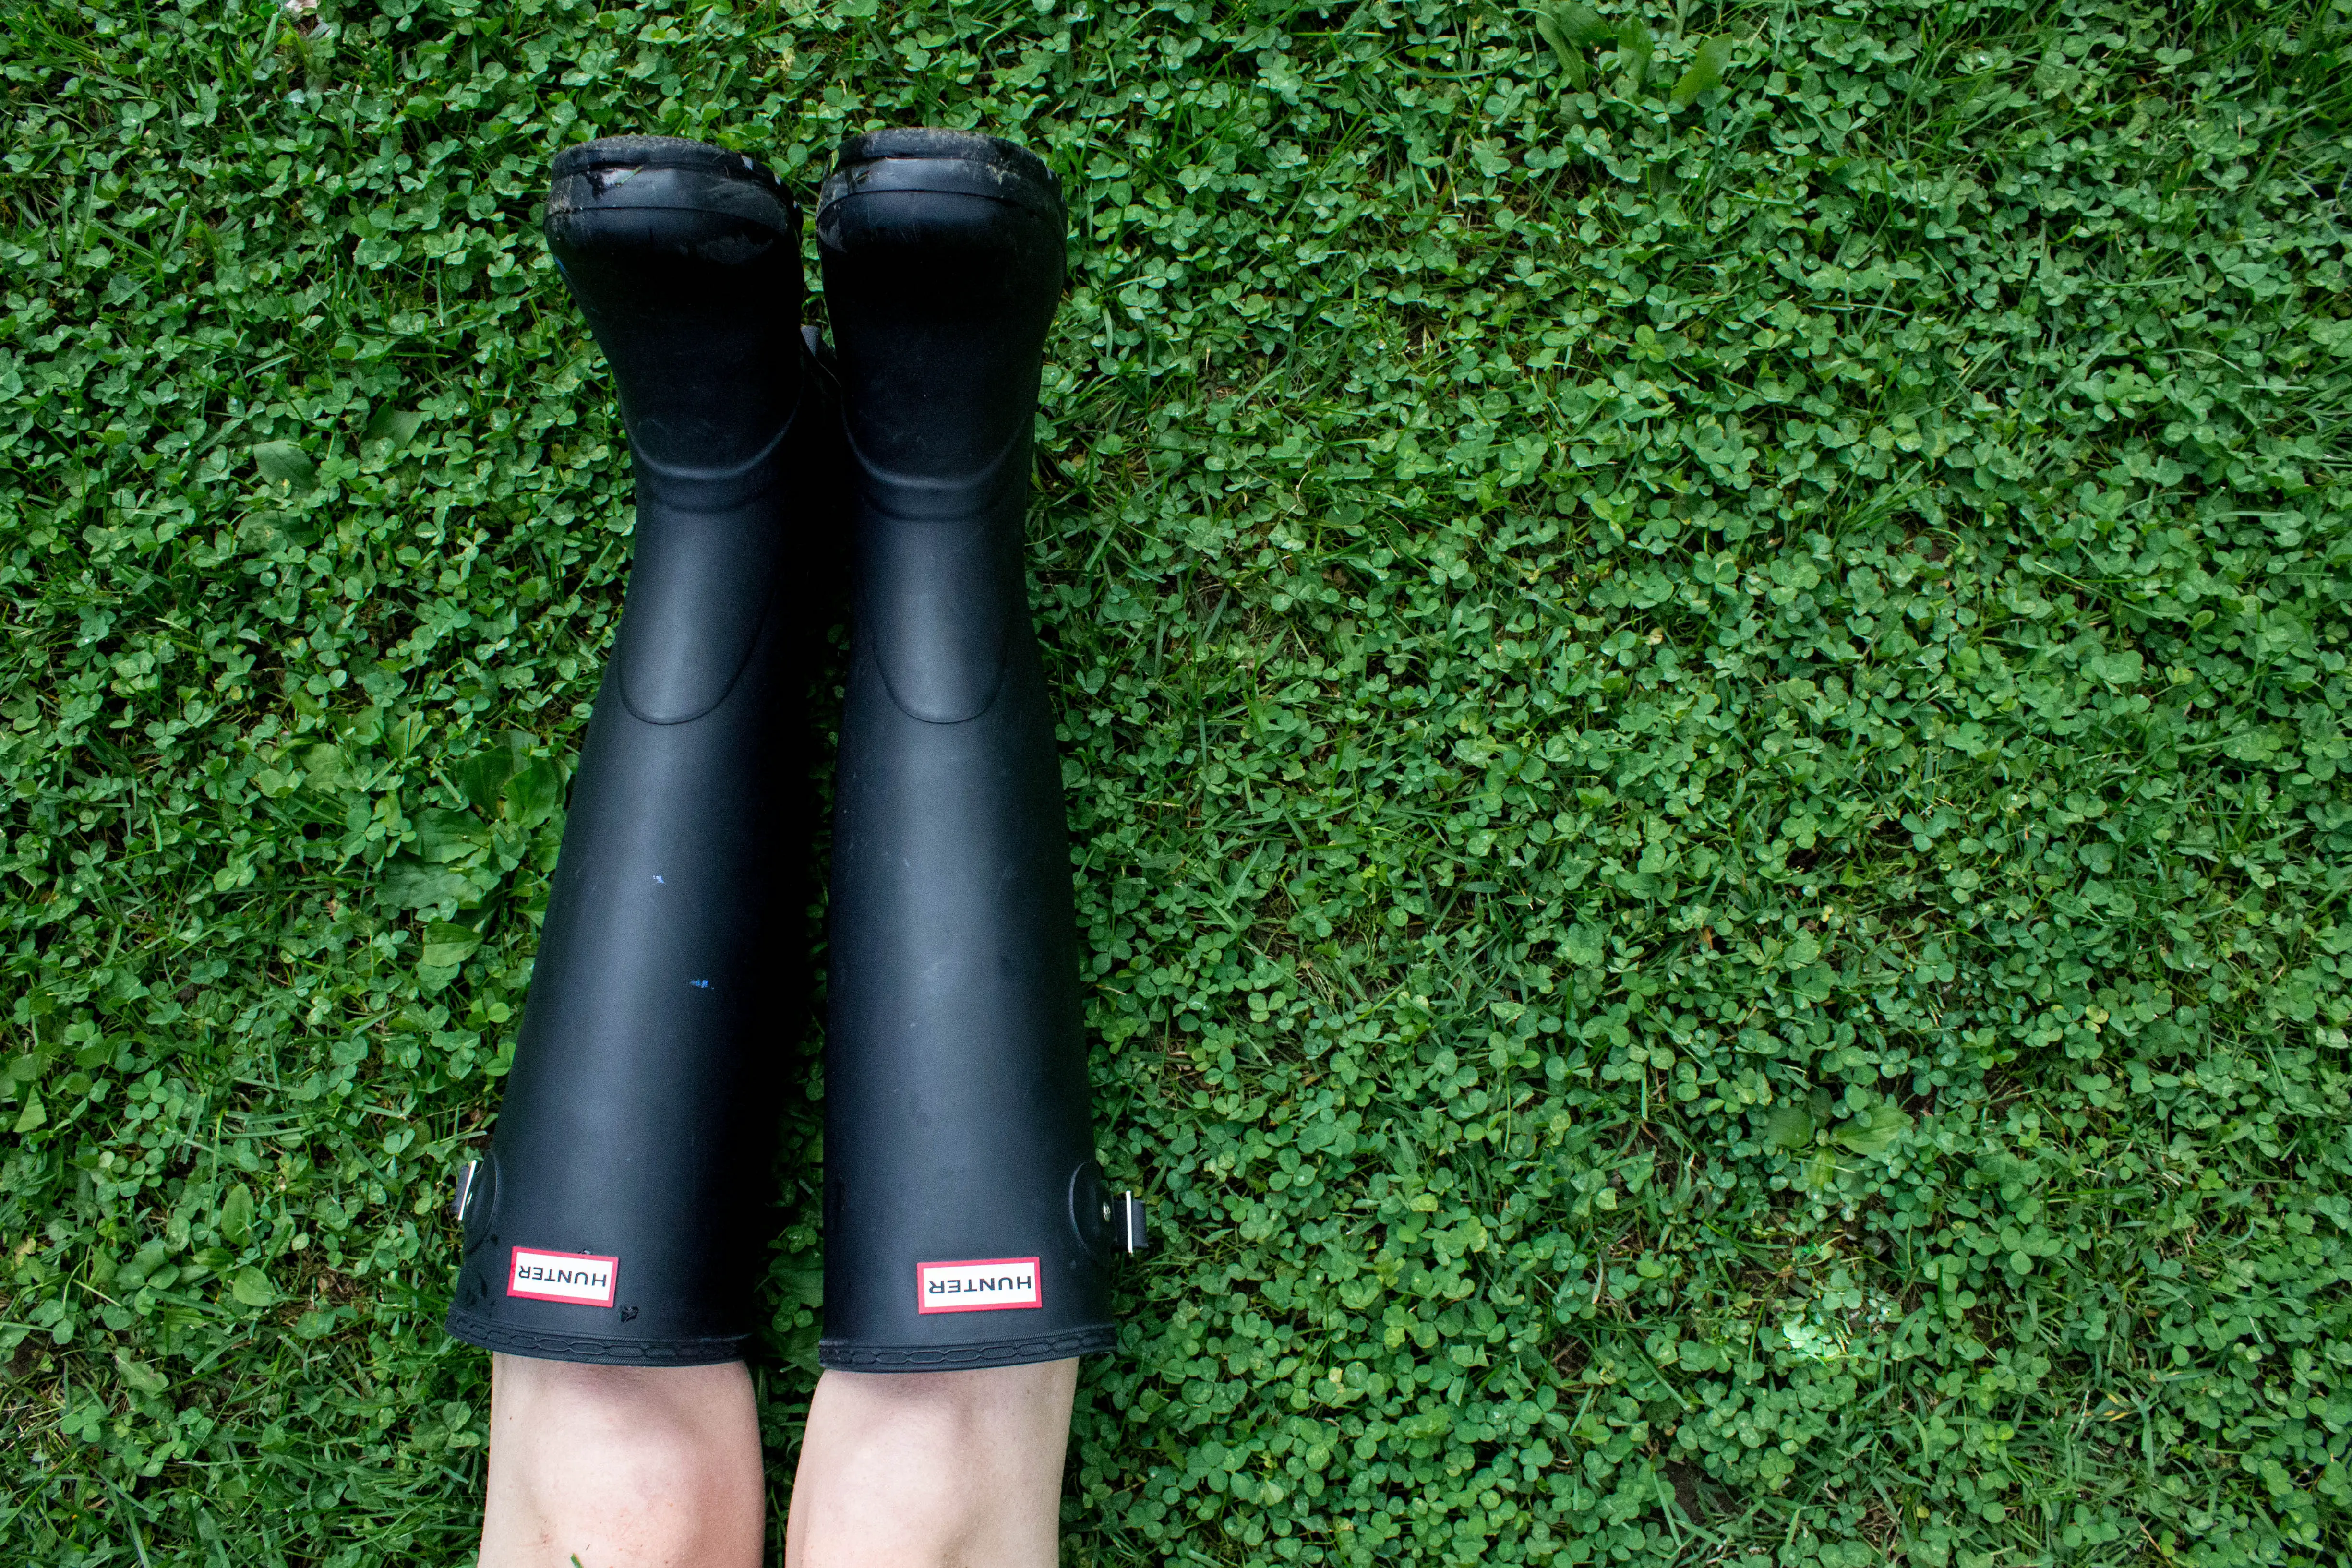 An in-depth review of the best Hunter rain boots available in 2019. 